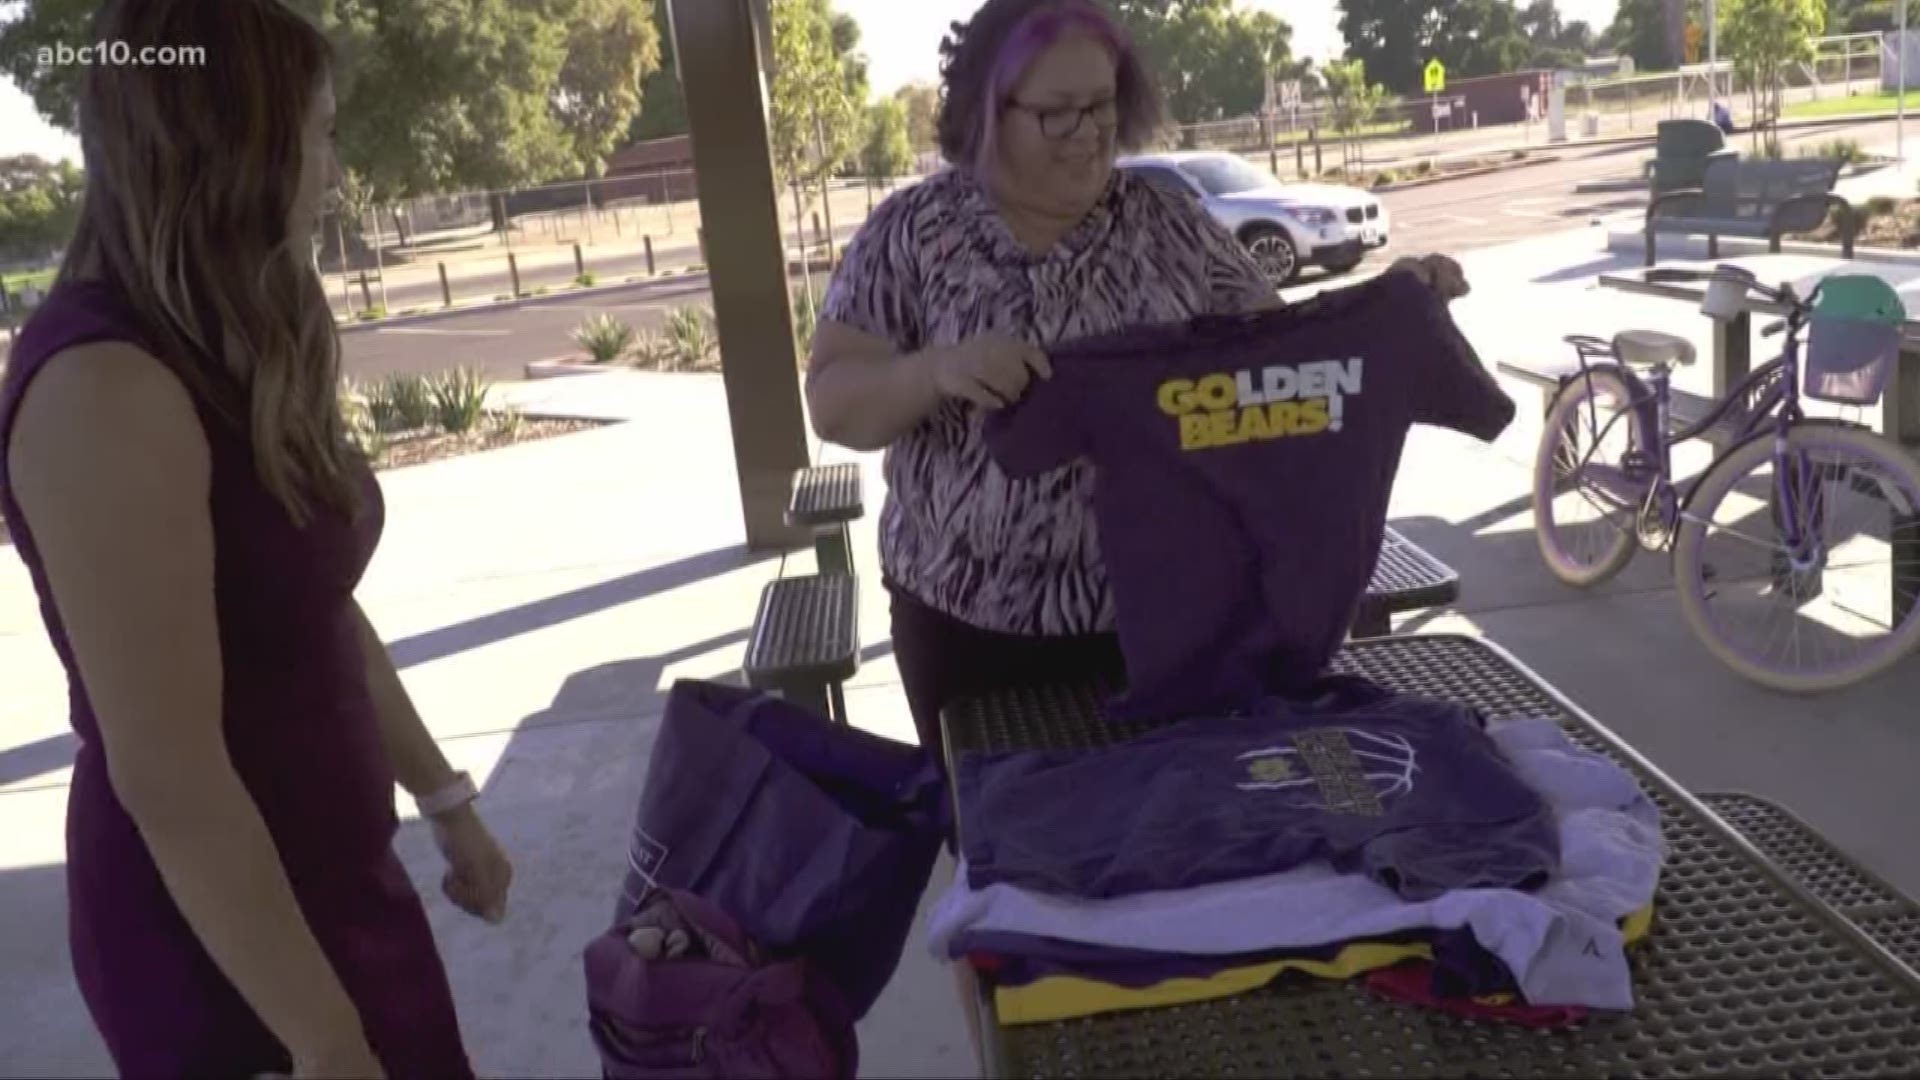 In the past two weeks, Garcia asked for donations for T-shirts on Facebook and at the Davis Farmers Market to give back to students who may not be able to afford them. She's gotten 16 T-shirts donated.